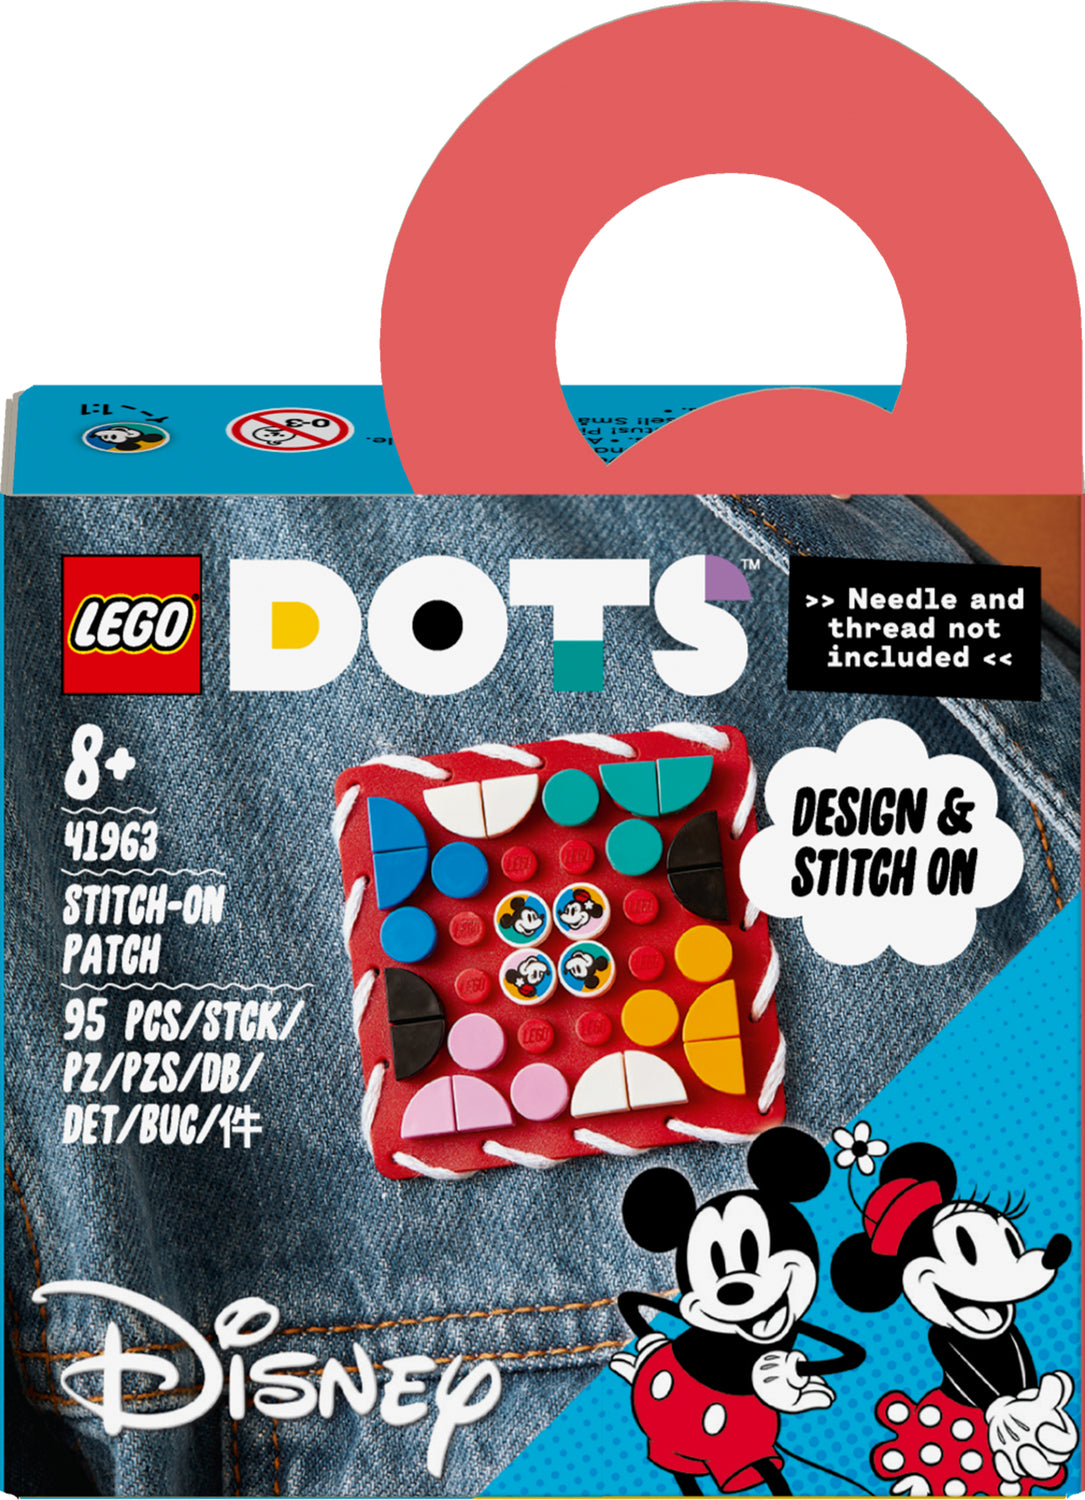 LEGO DOTS - Mickey Mouse & Minnie Mouse Stitch-on Patch 41963 